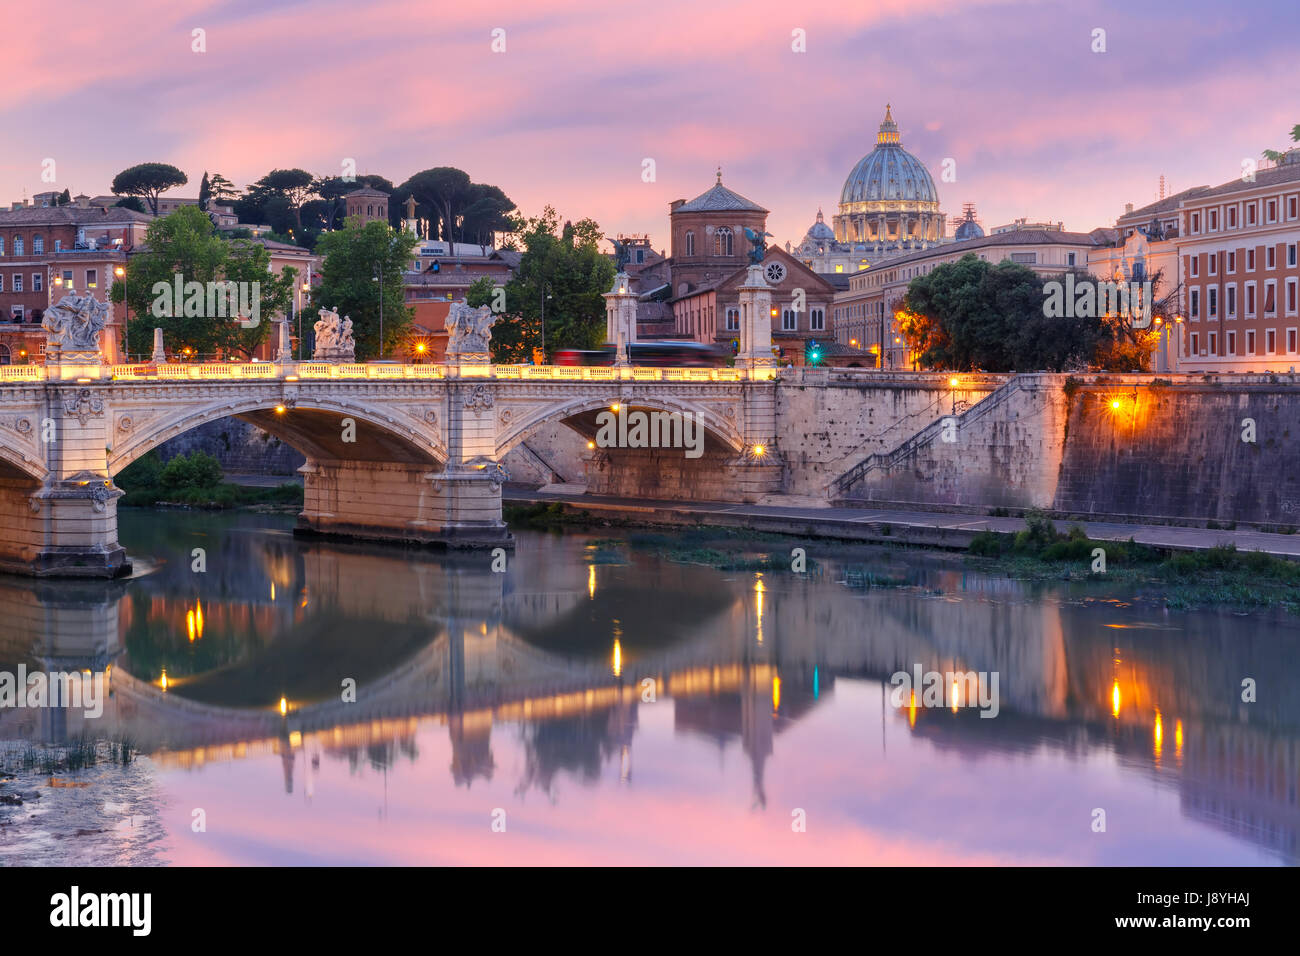 Saint Peter Cathedral at sunset in Rome, Italy. Stock Photo